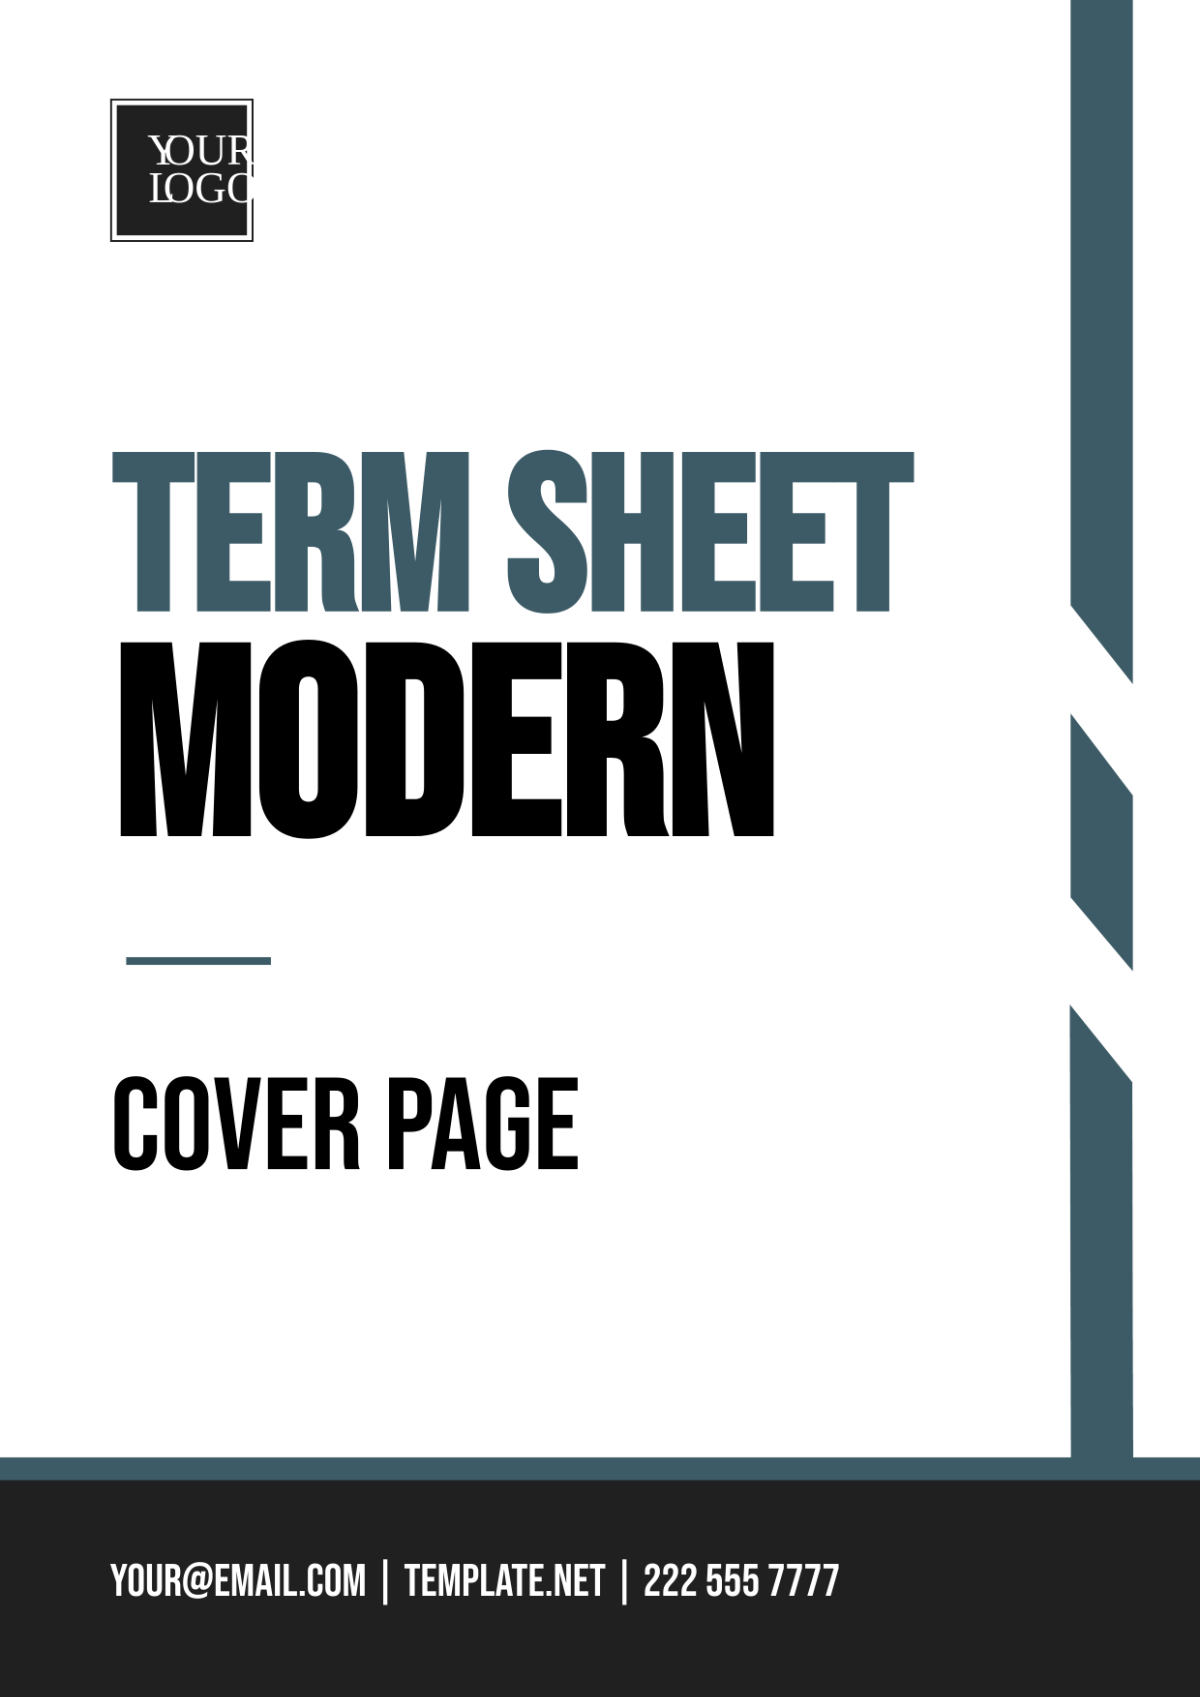 Term Sheet Modern Cover Page